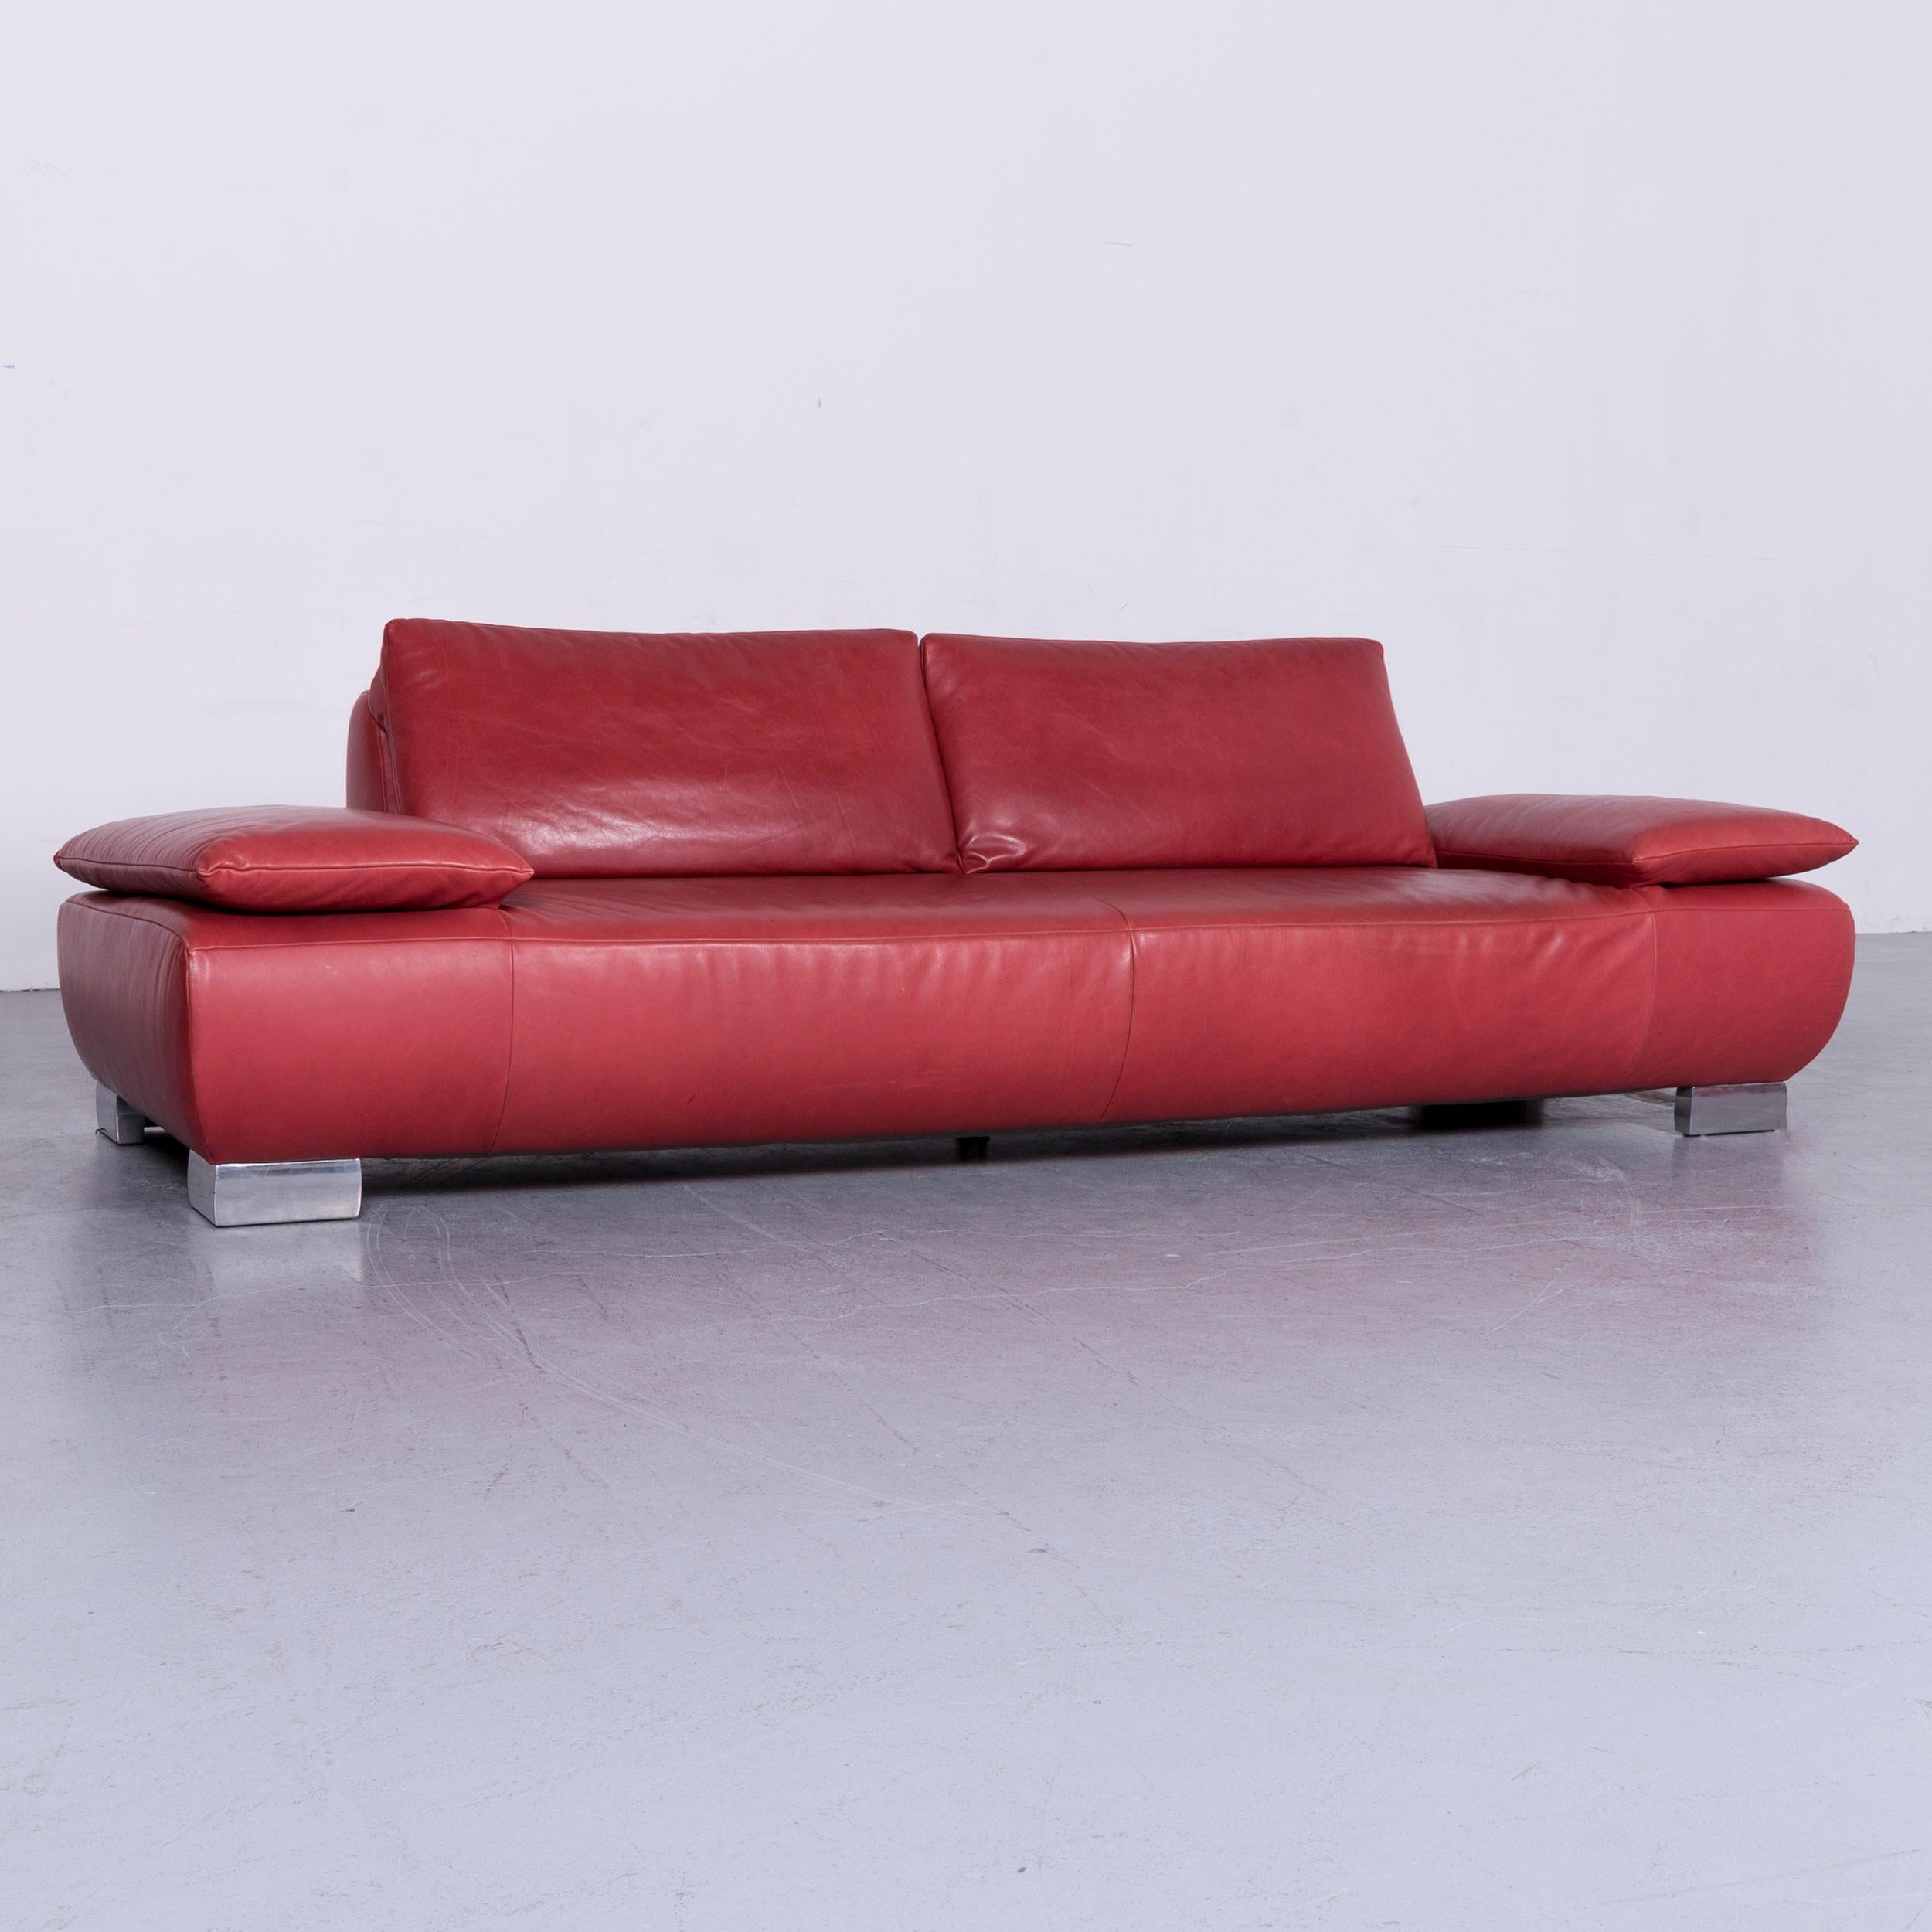 Koinor Volare Designer Sofa Red Three-Seat Leather Couch with Function In Good Condition For Sale In Cologne, DE